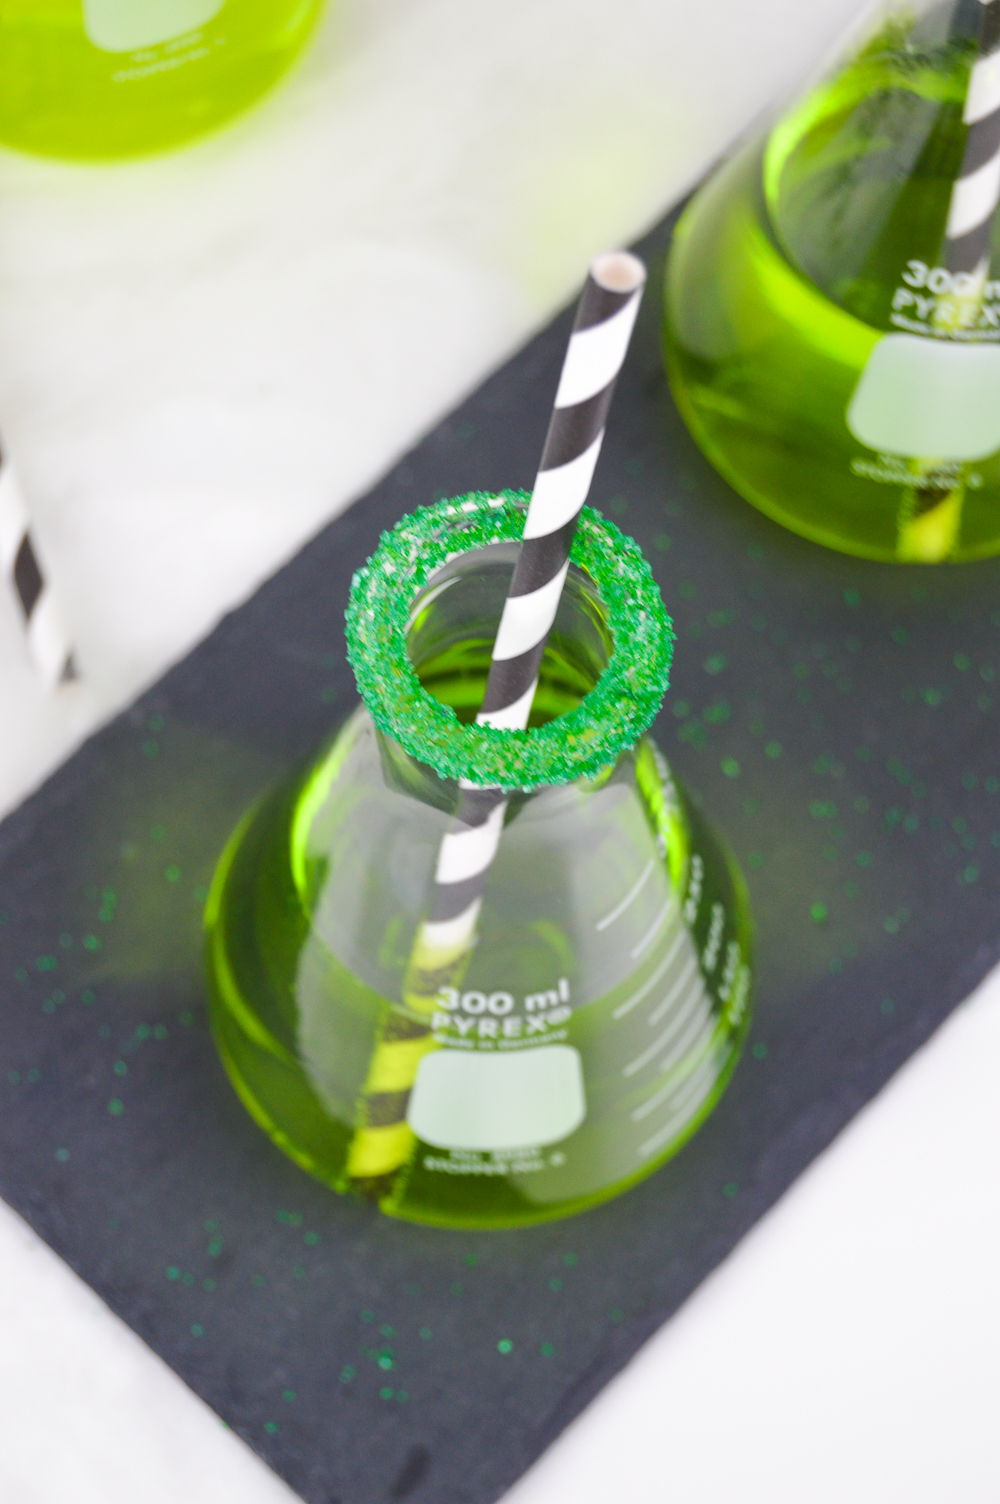 Green Chemical Cocktail for Halloween | Club Crafted